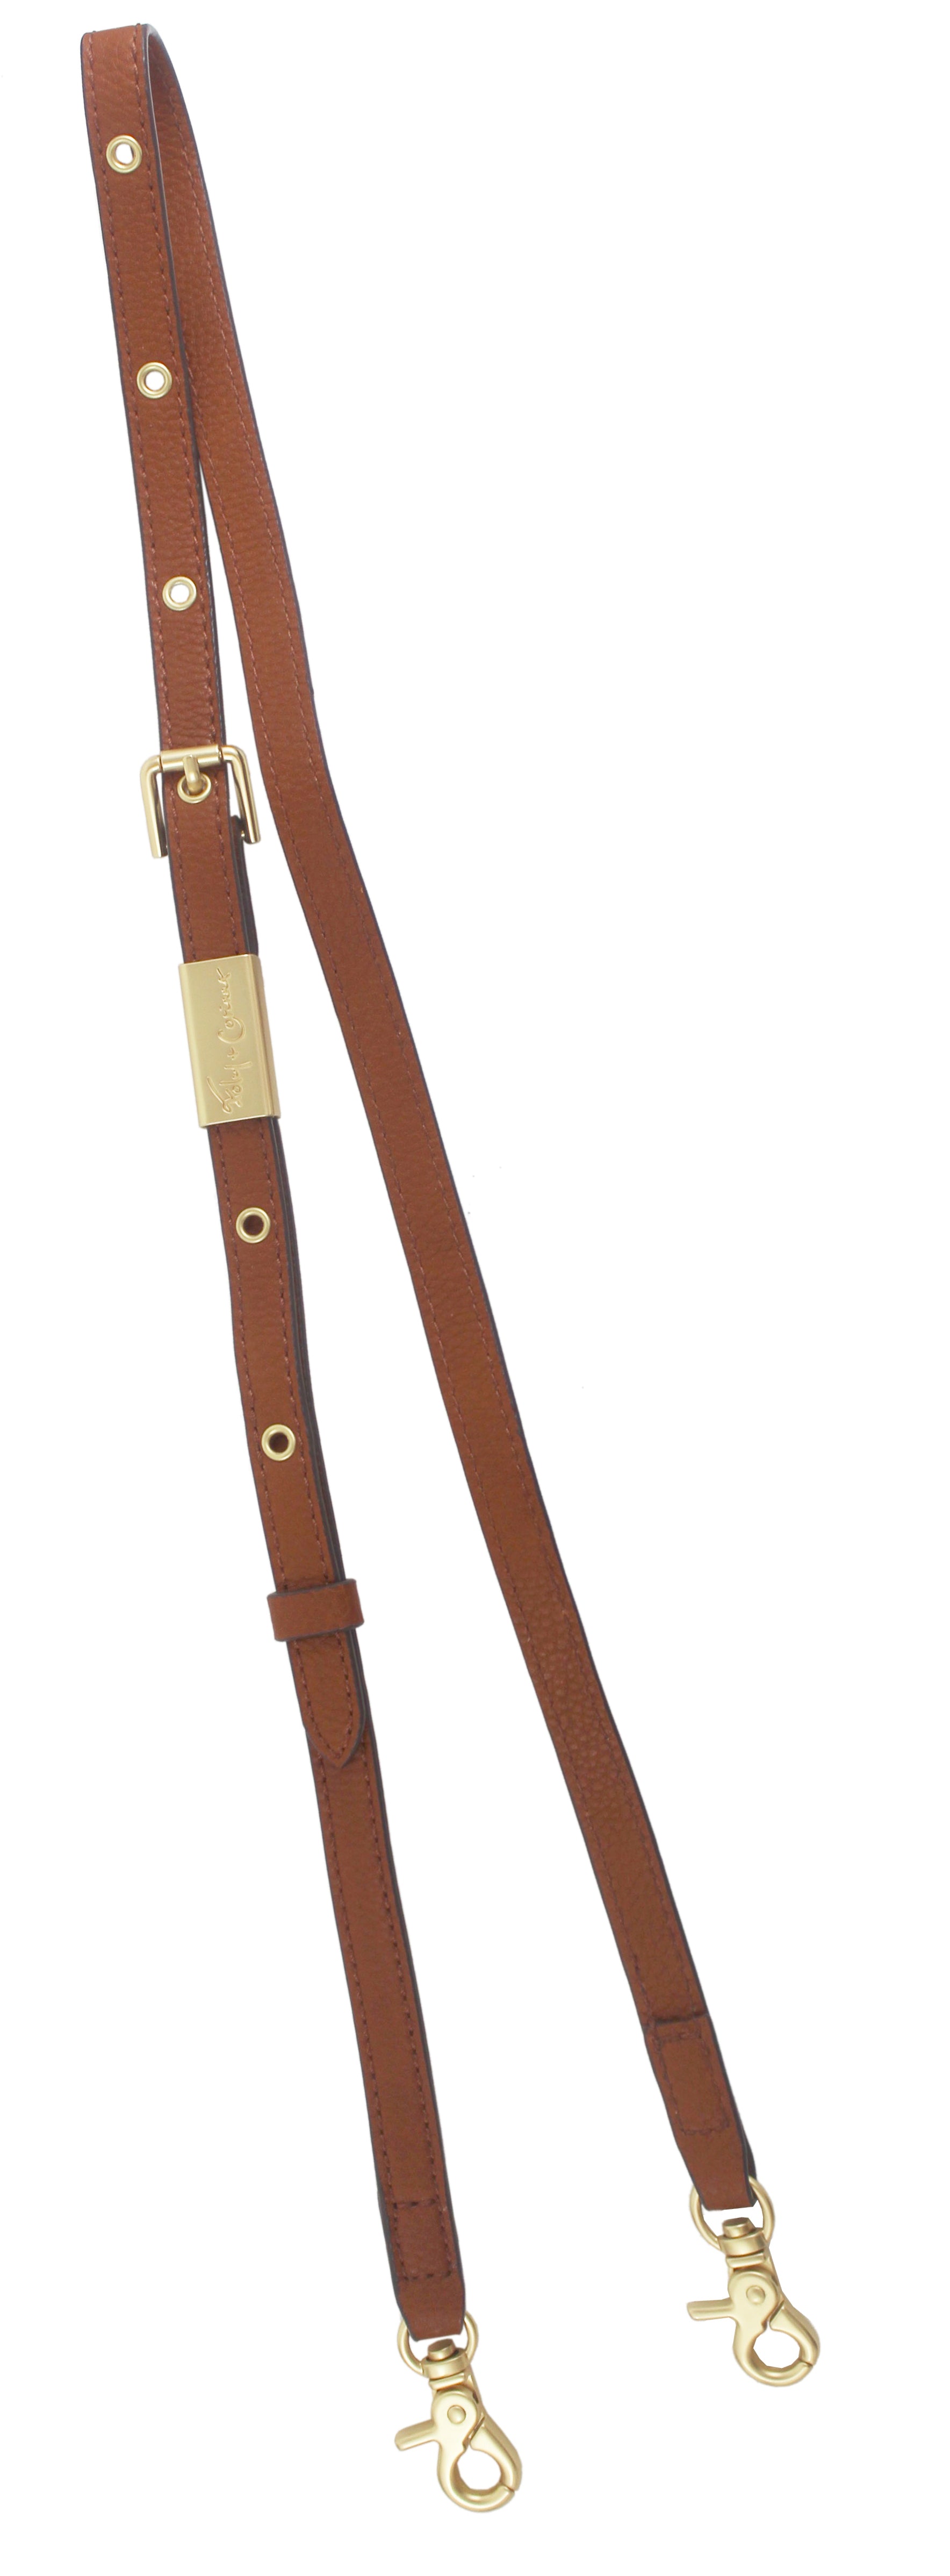 Crossbody Purse Strap Replacement Strap for Bag Vegan Leather 